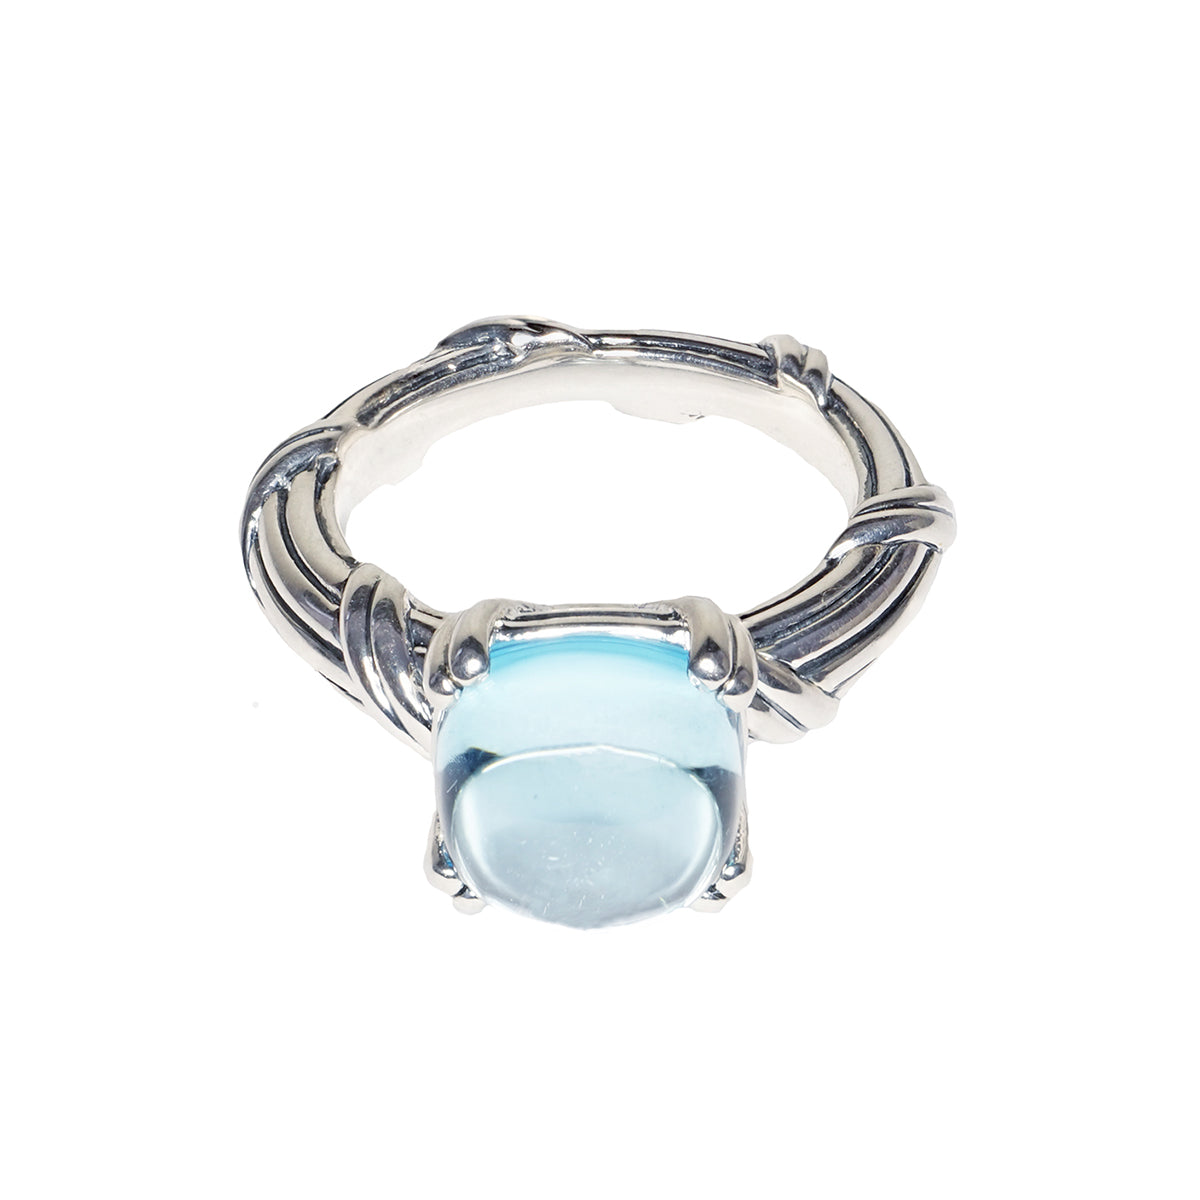 Fantasies Blue Topaz Cabochon Ring in sterling silver 10mm